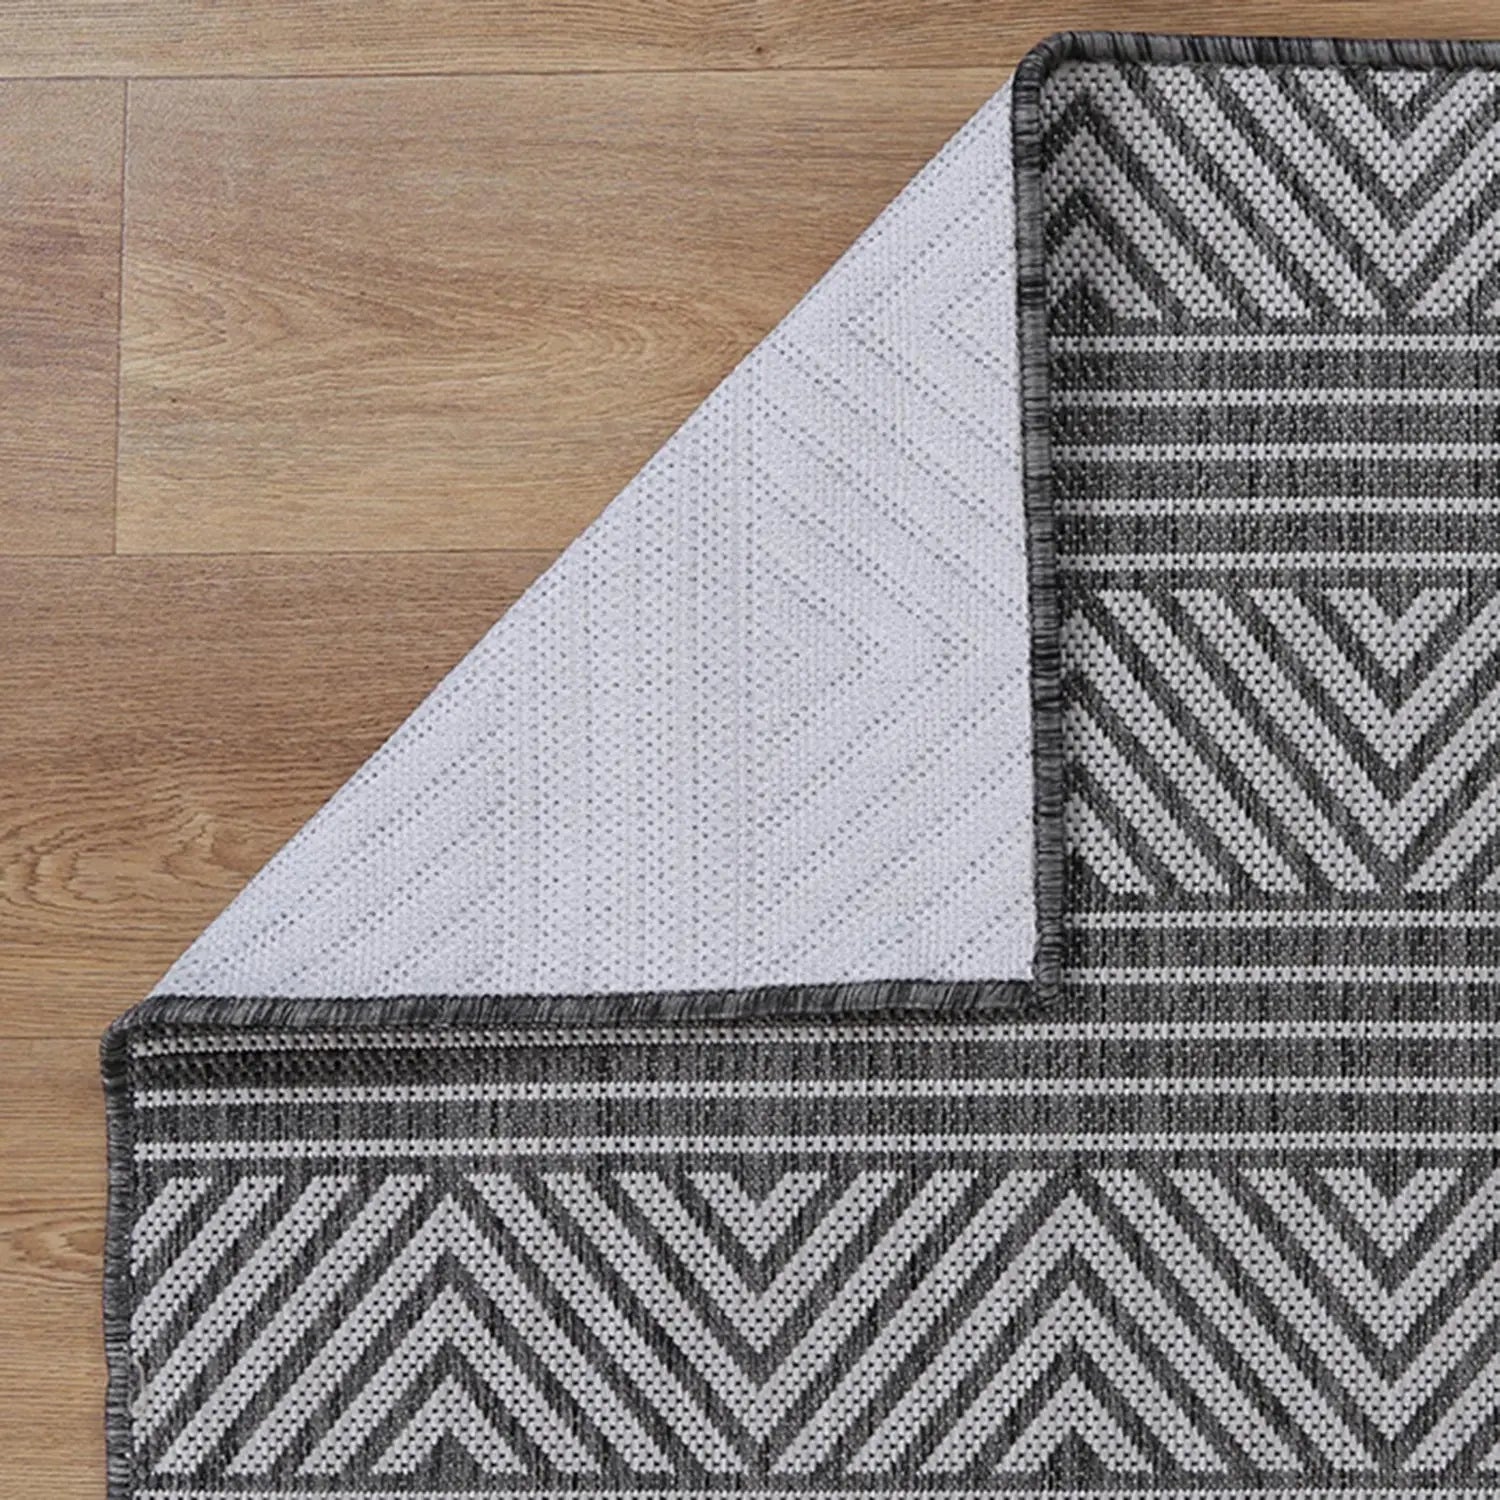 Elements Outdoor Anthracite Grey Rug - Rugs - Rugs a Million